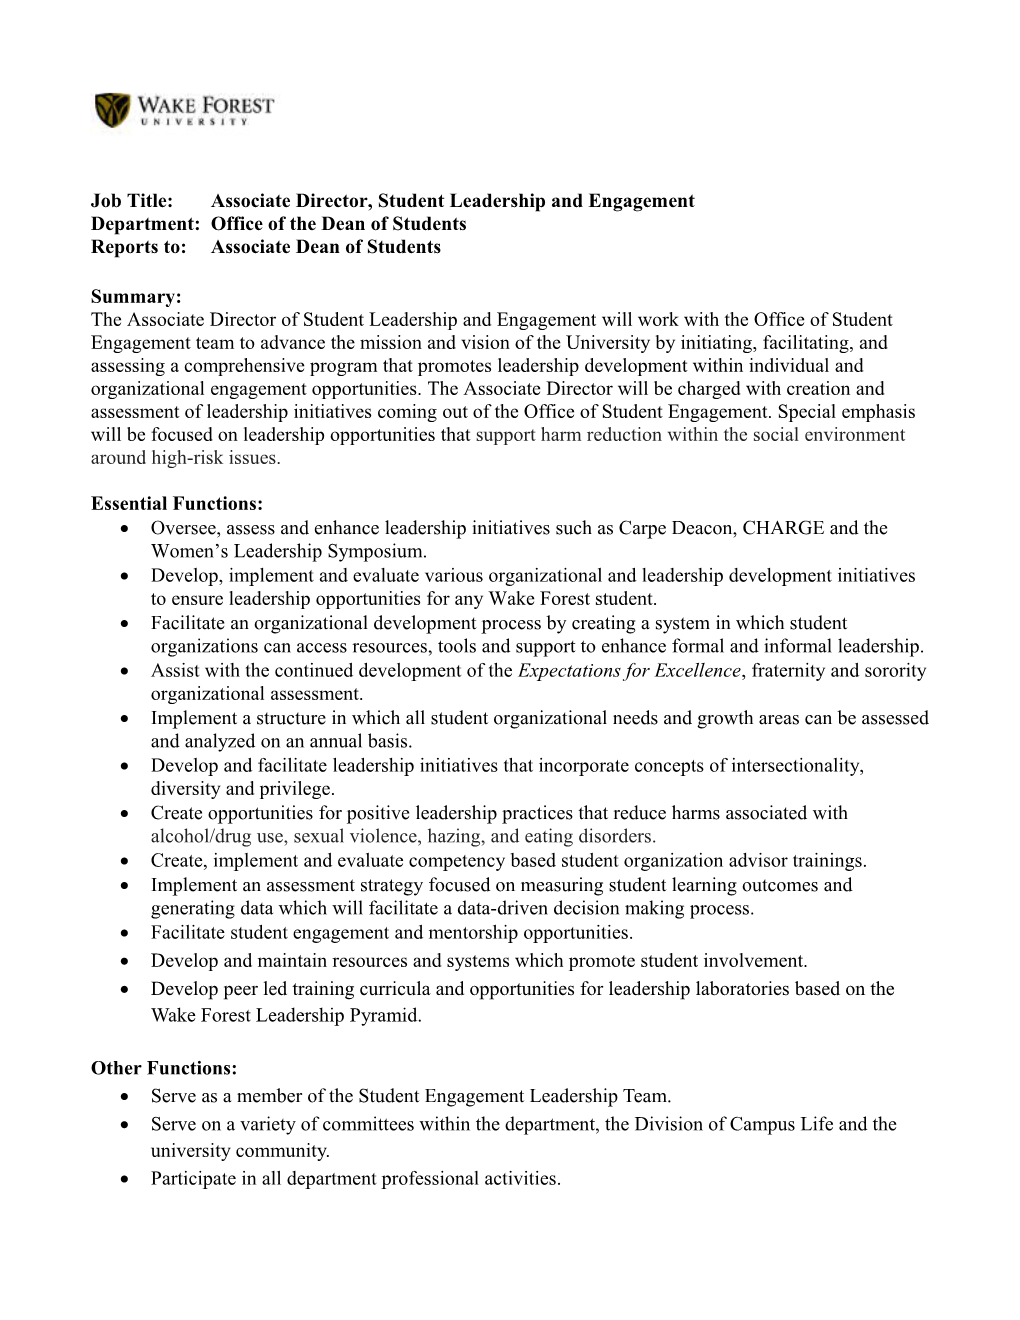 Job Title: Associate Director, Student Leadership and Engagement